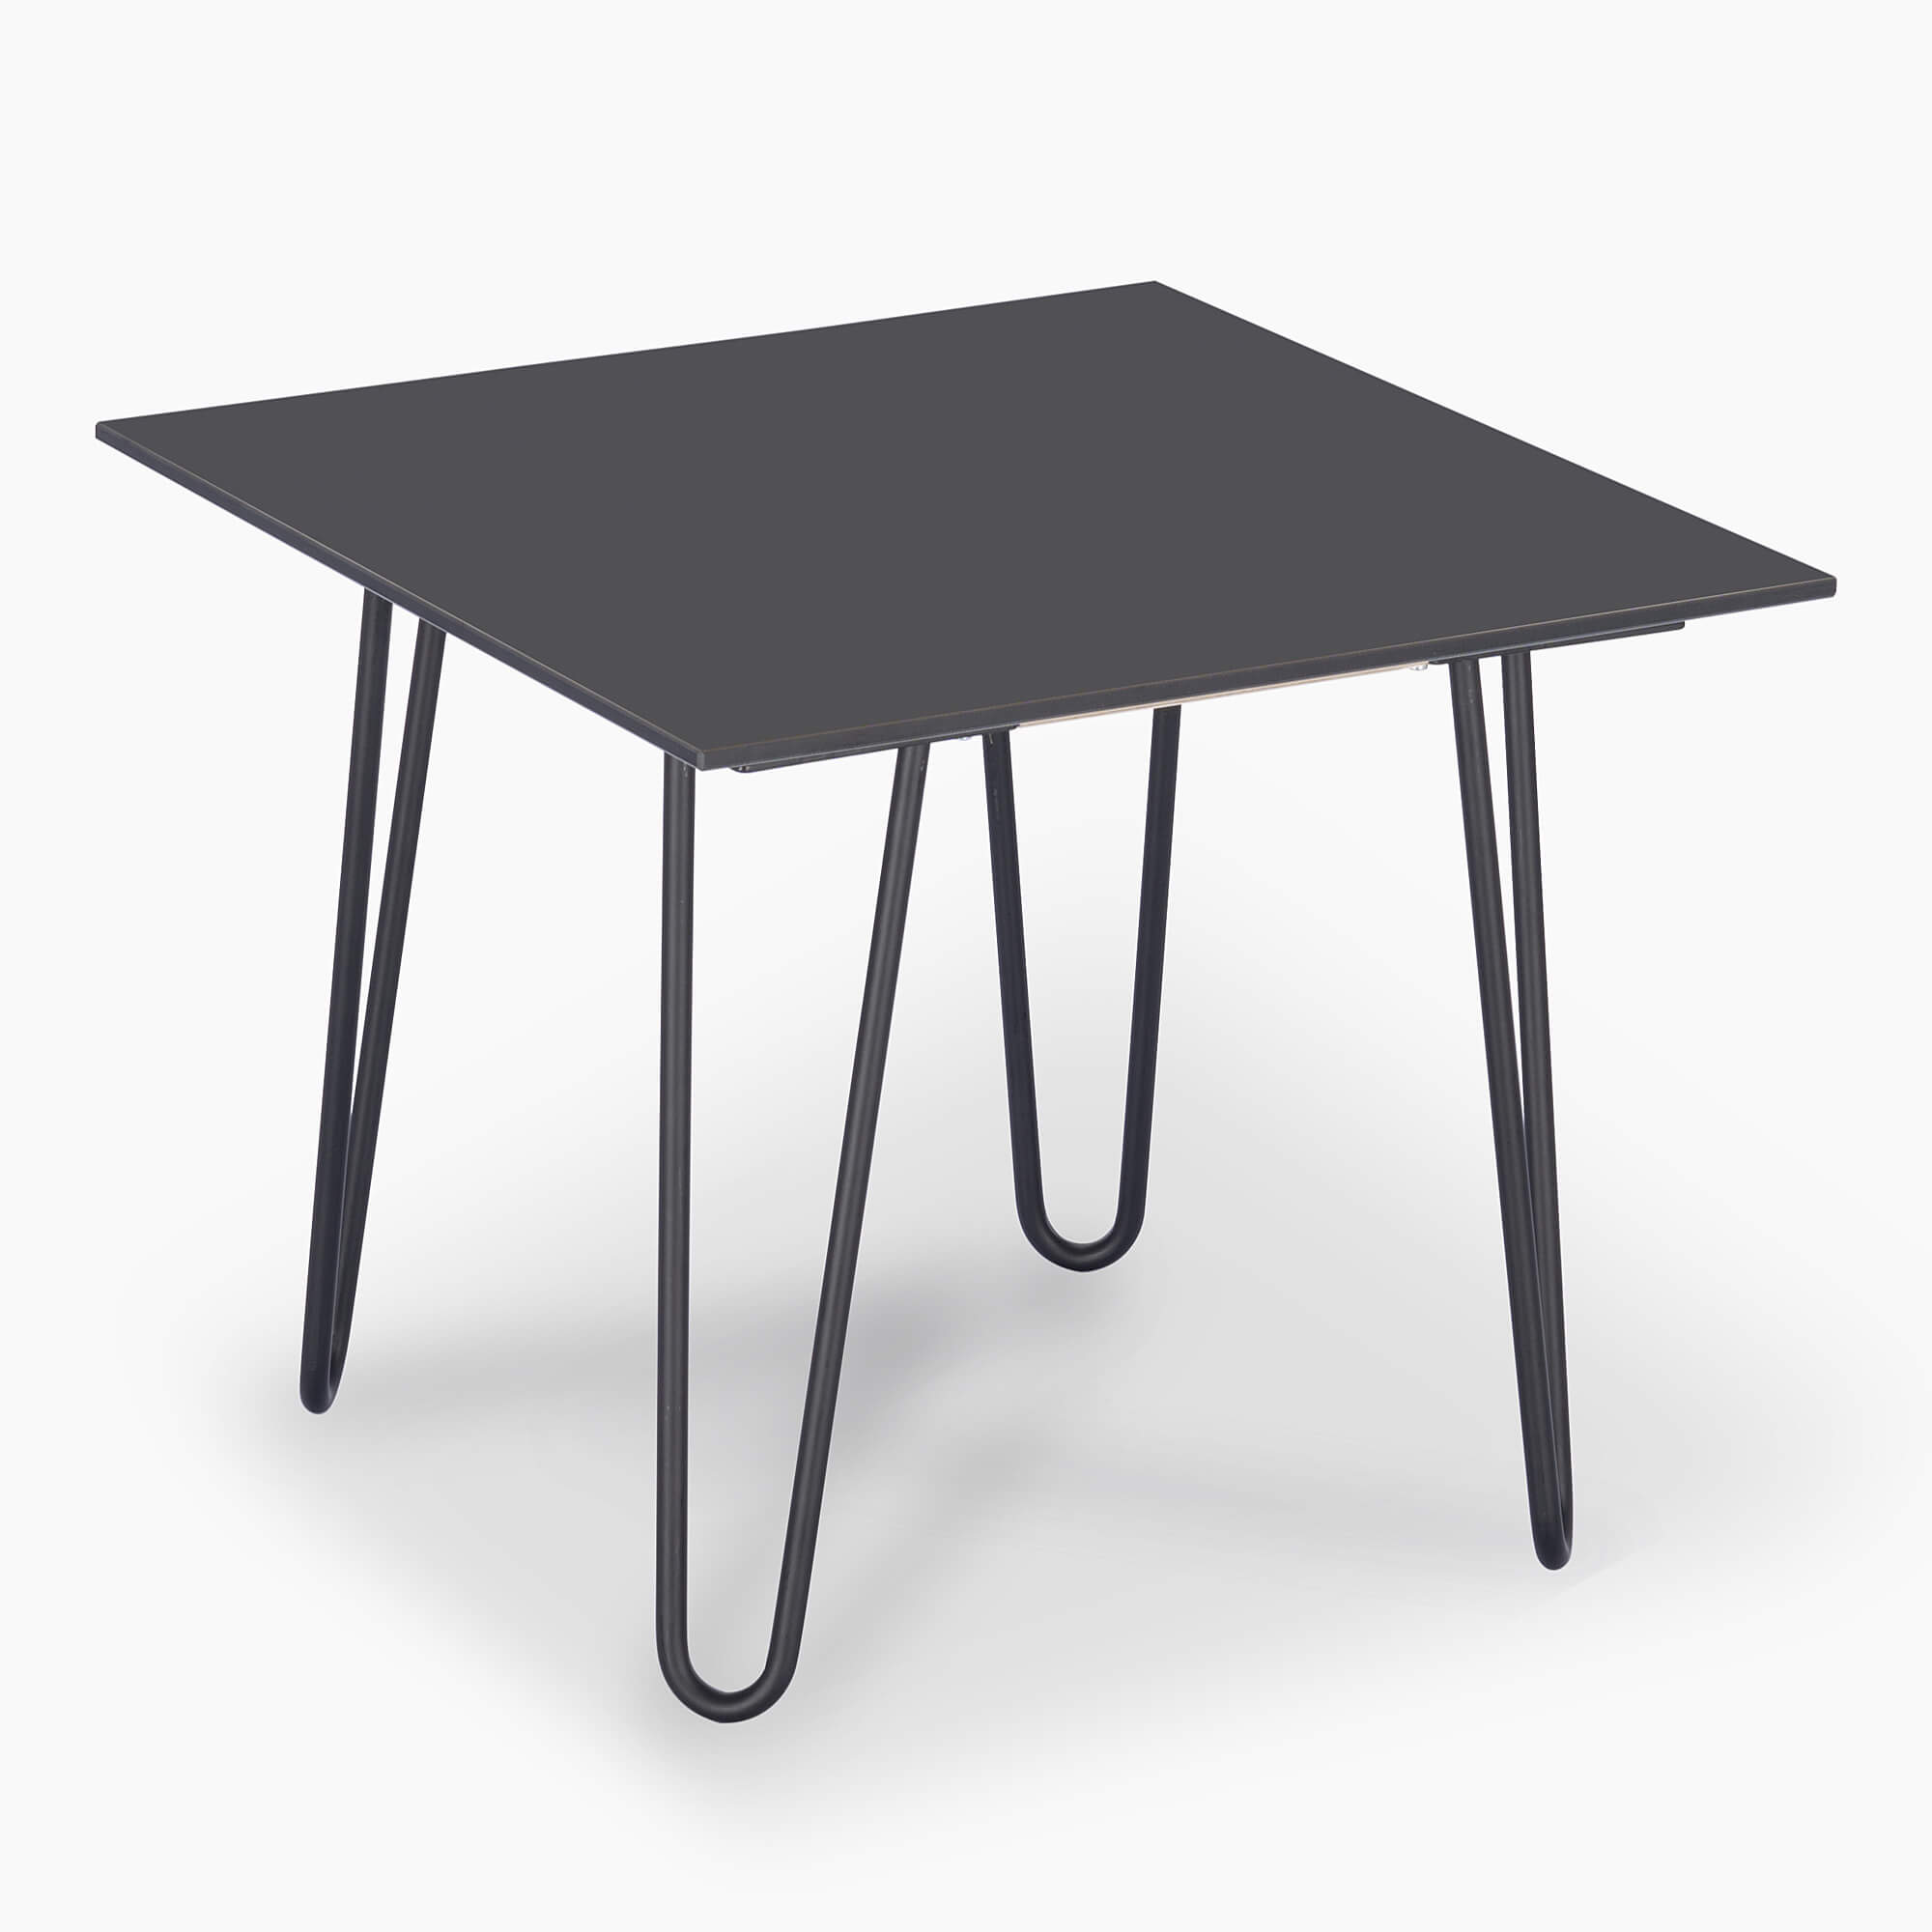 Small-grey-occasional-table-anthracite-metal-legs-black